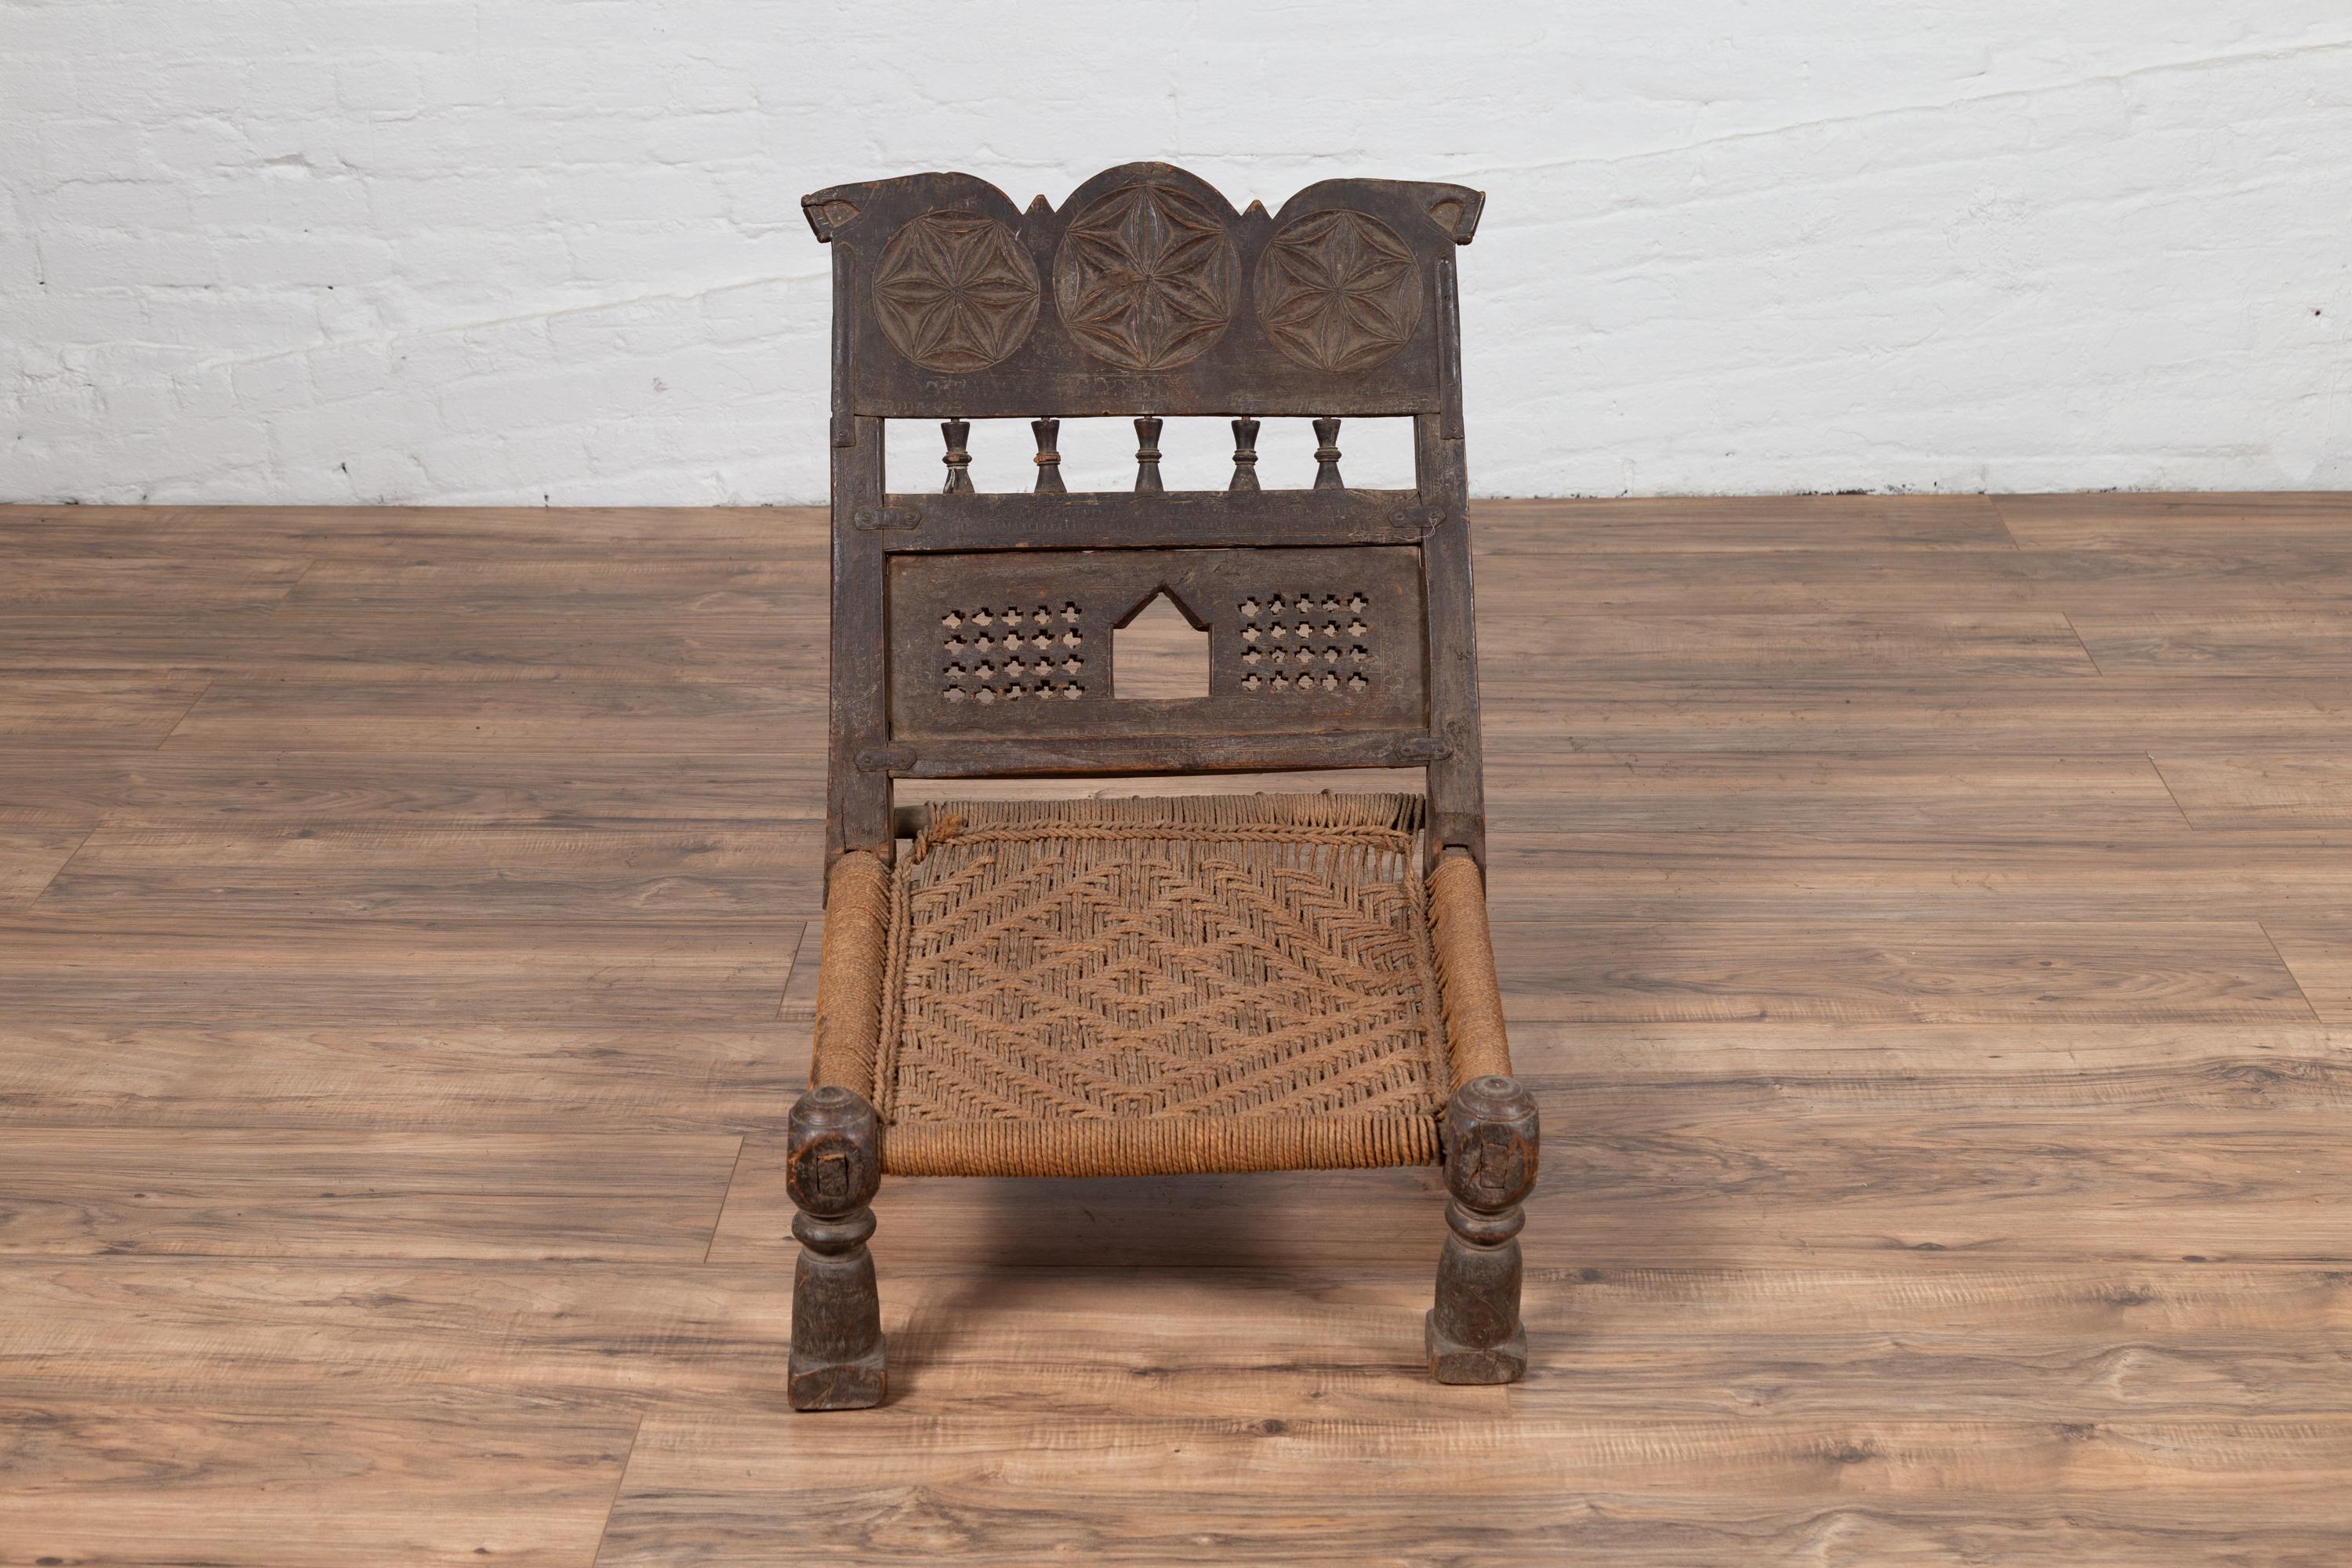 An old Indian rustic wooden low chair from the early 20th century, with handwoven rope seat and carved motifs. Charming our eyes with its rustic appearance, this low seat wooden chair features a short slanted back, adorned with three rosettes hand